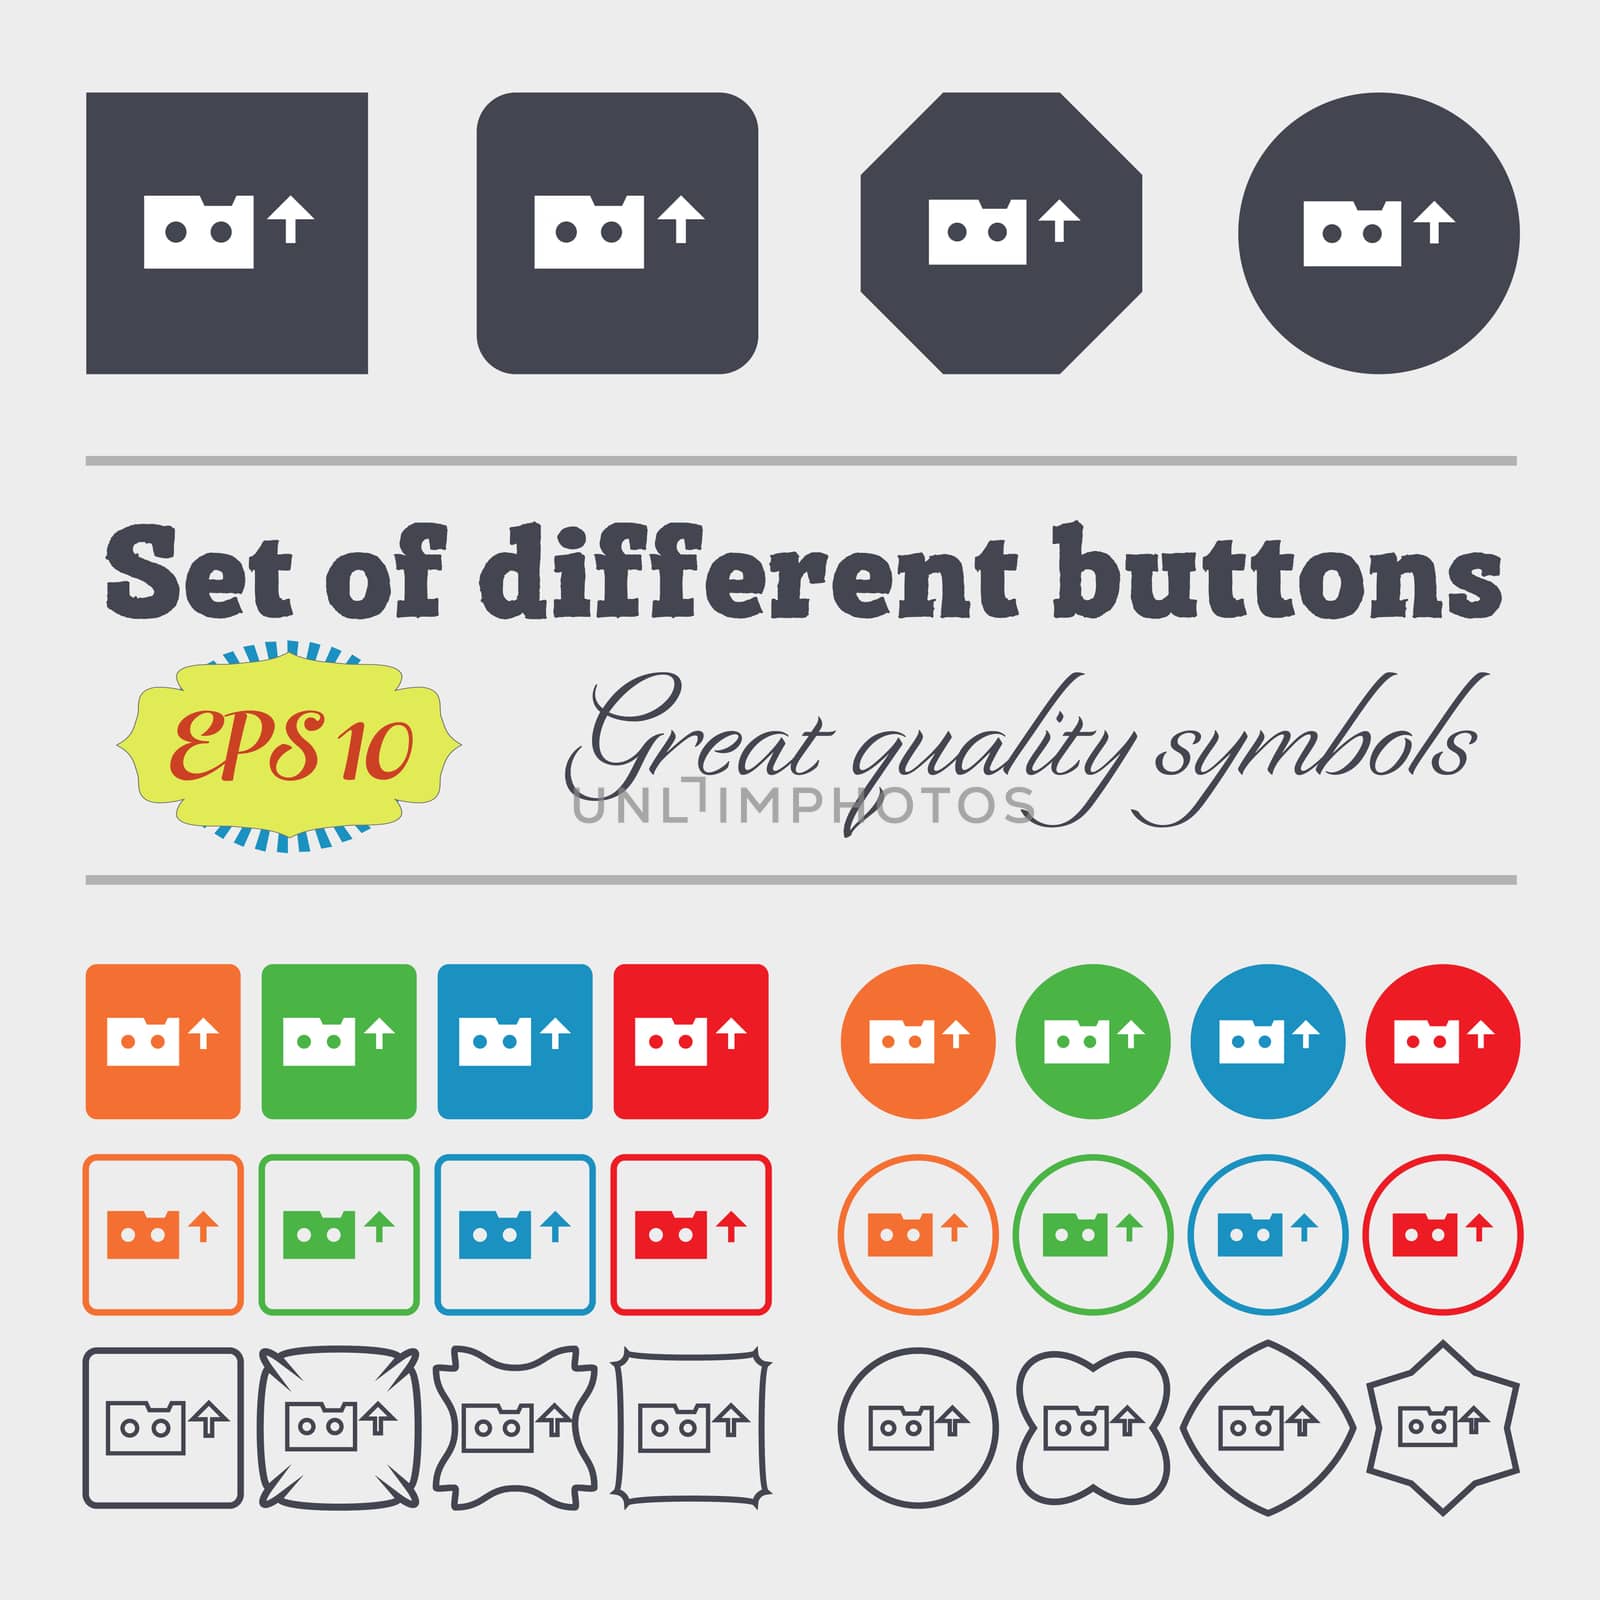 audio cassette icon sign. Big set of colorful, diverse, high-quality buttons. illustration